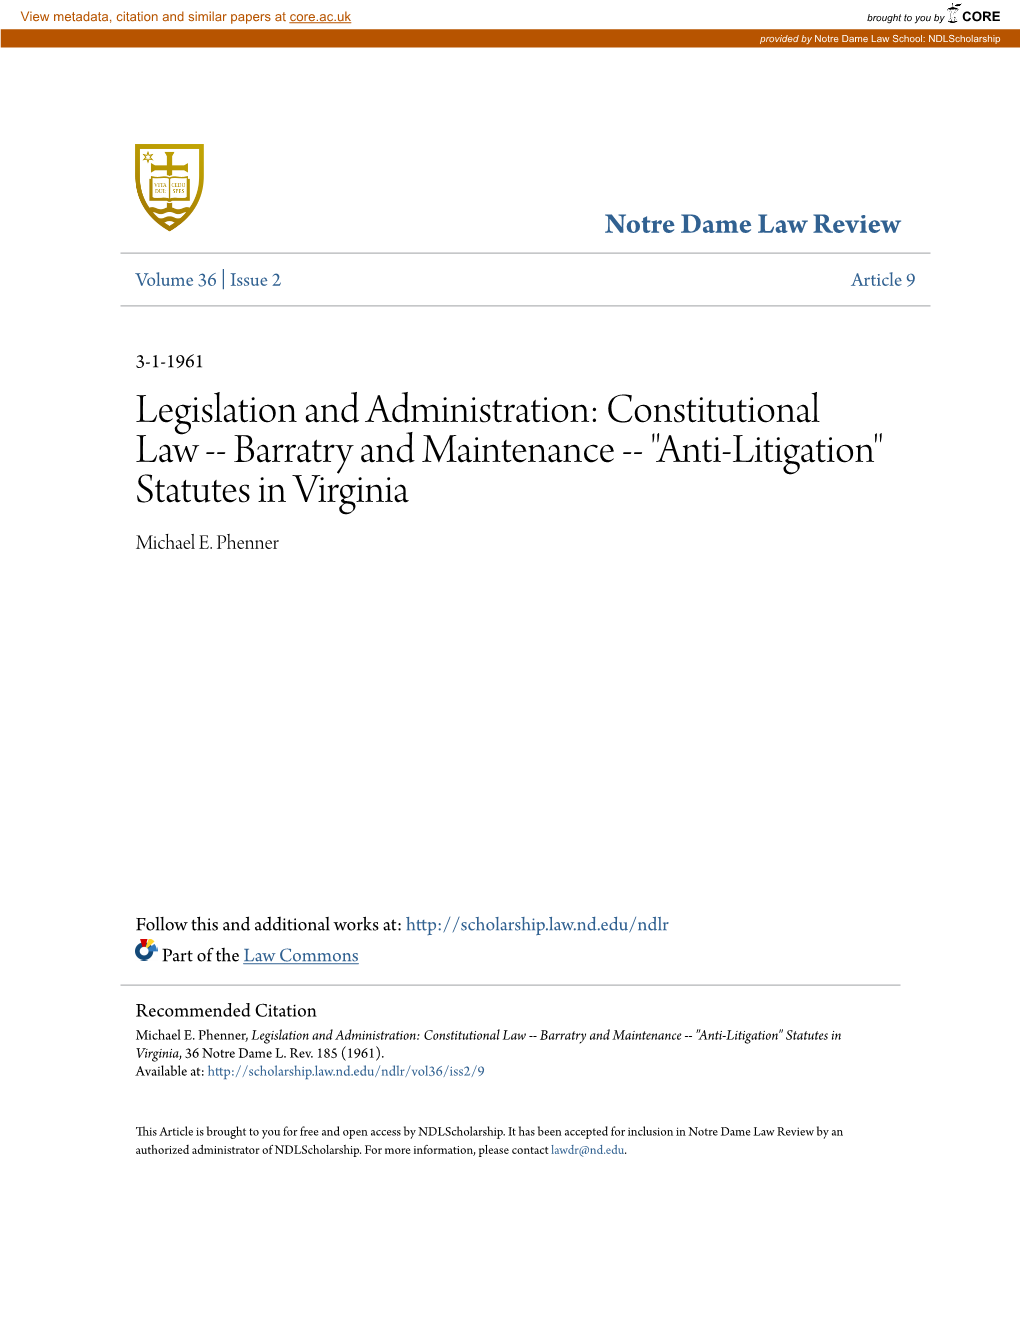 Constitutional Law -- Barratry and Maintenance -- "Anti-Litigation" Statutes in Virginia Michael E